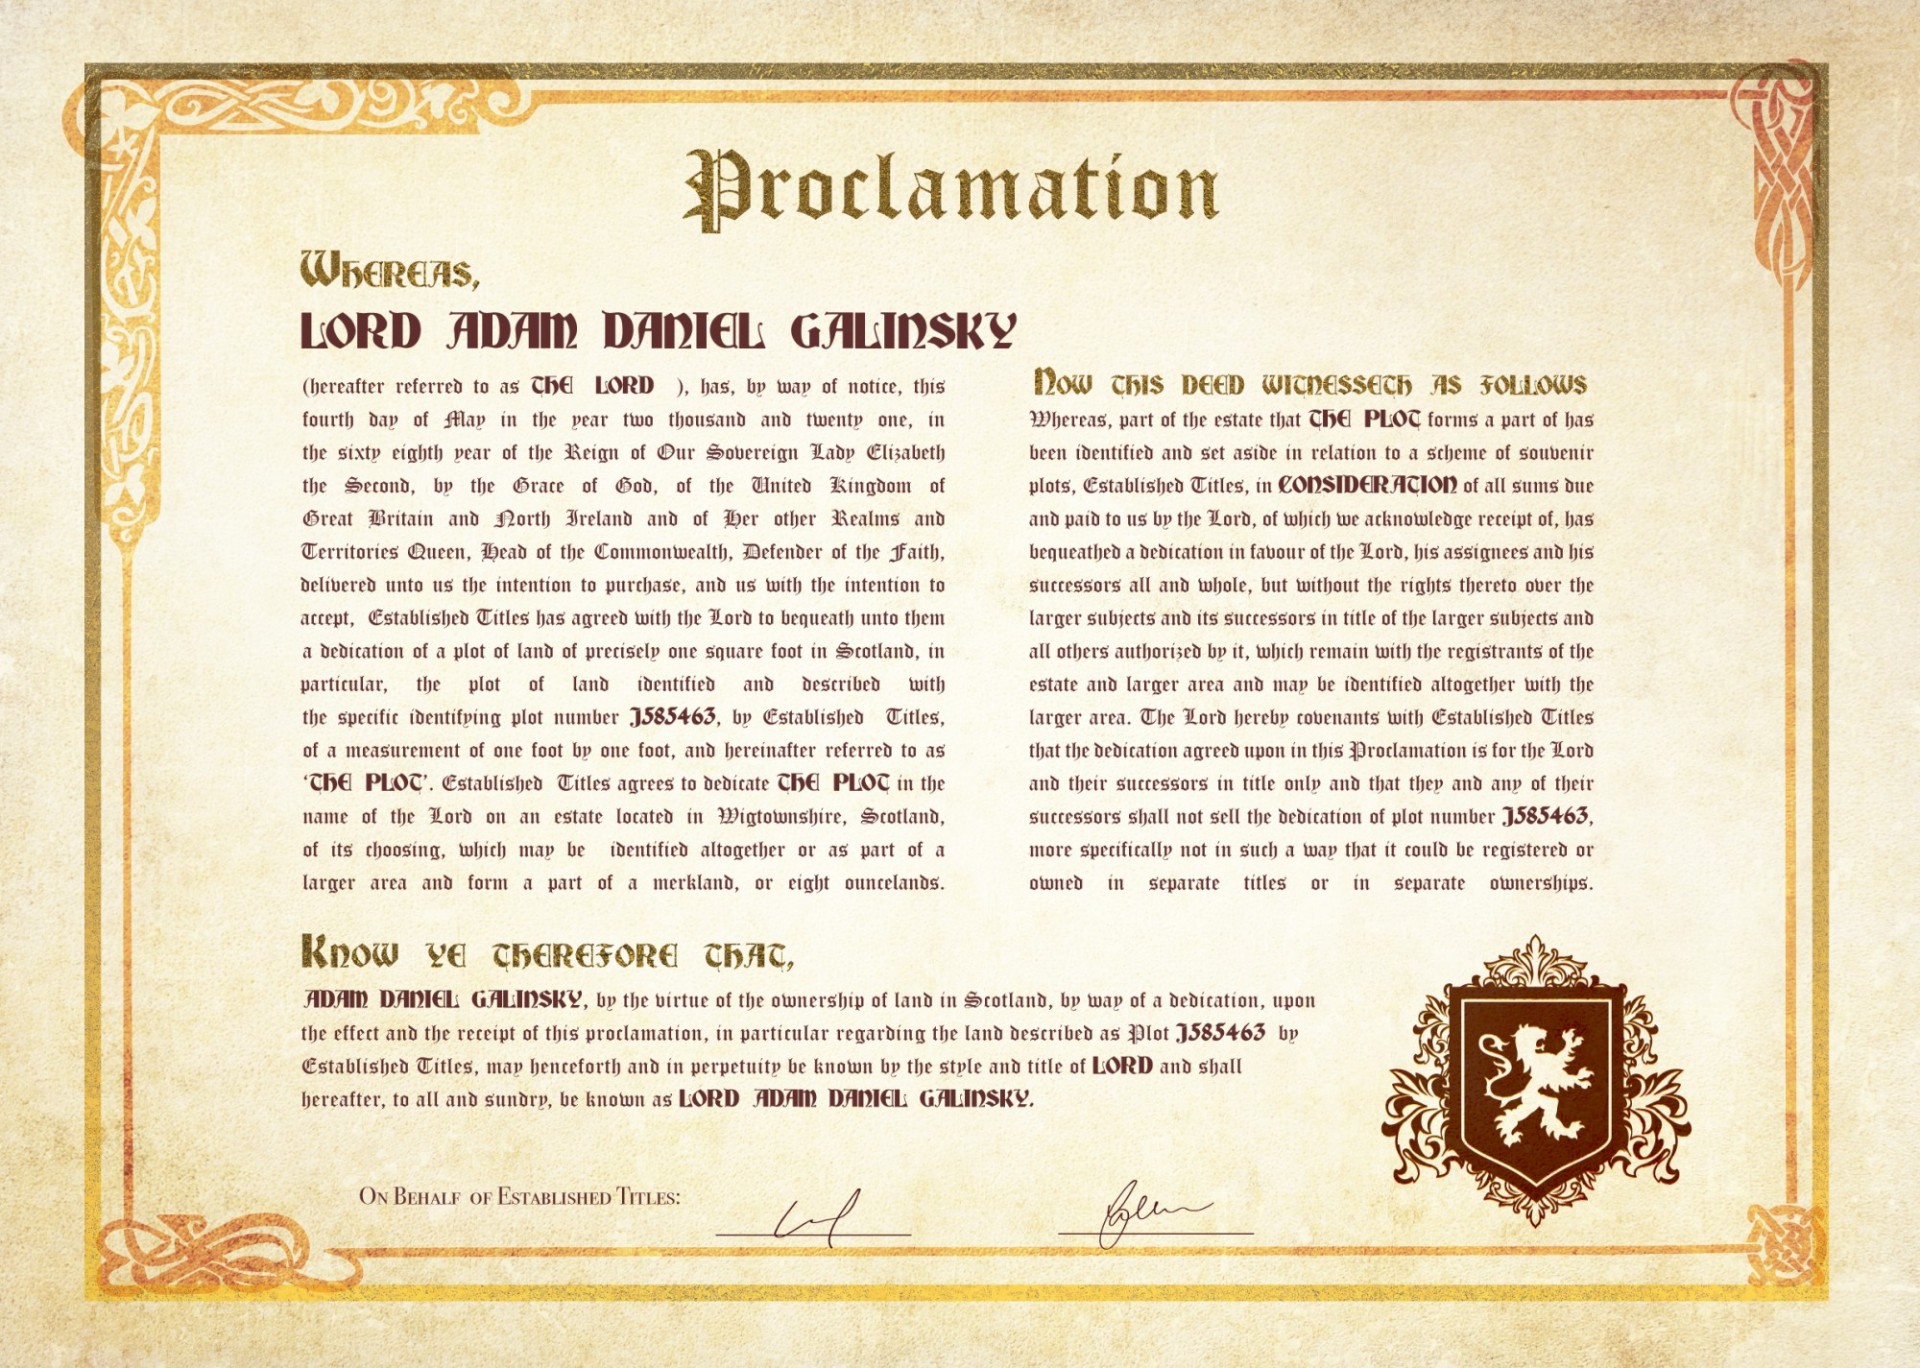 Certificate that reads "proclamation" at the top and confers lordship to Professor Adam Galinsky. 